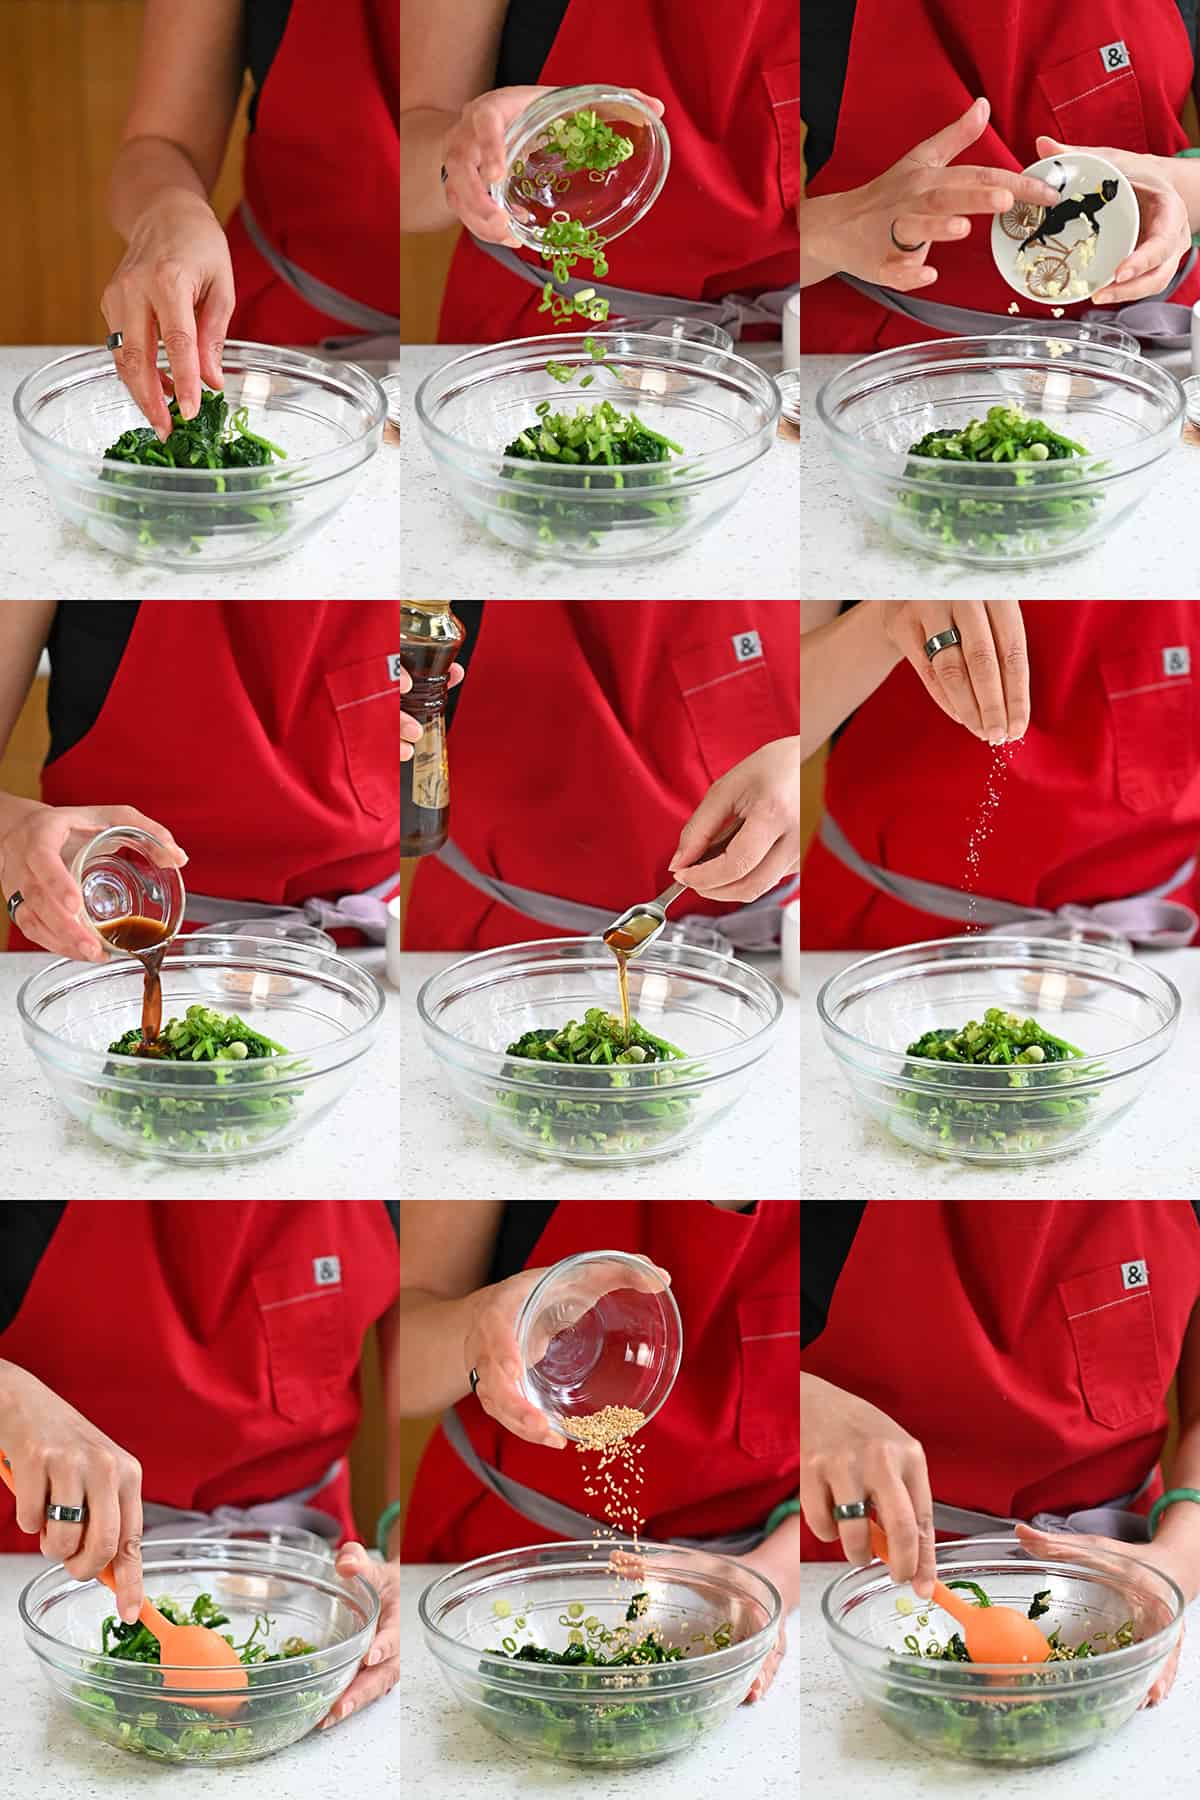 Nine sequential process shots that show someone adding the ingredients to make Korean spinach side dish into a glass bowl and mixing them together.